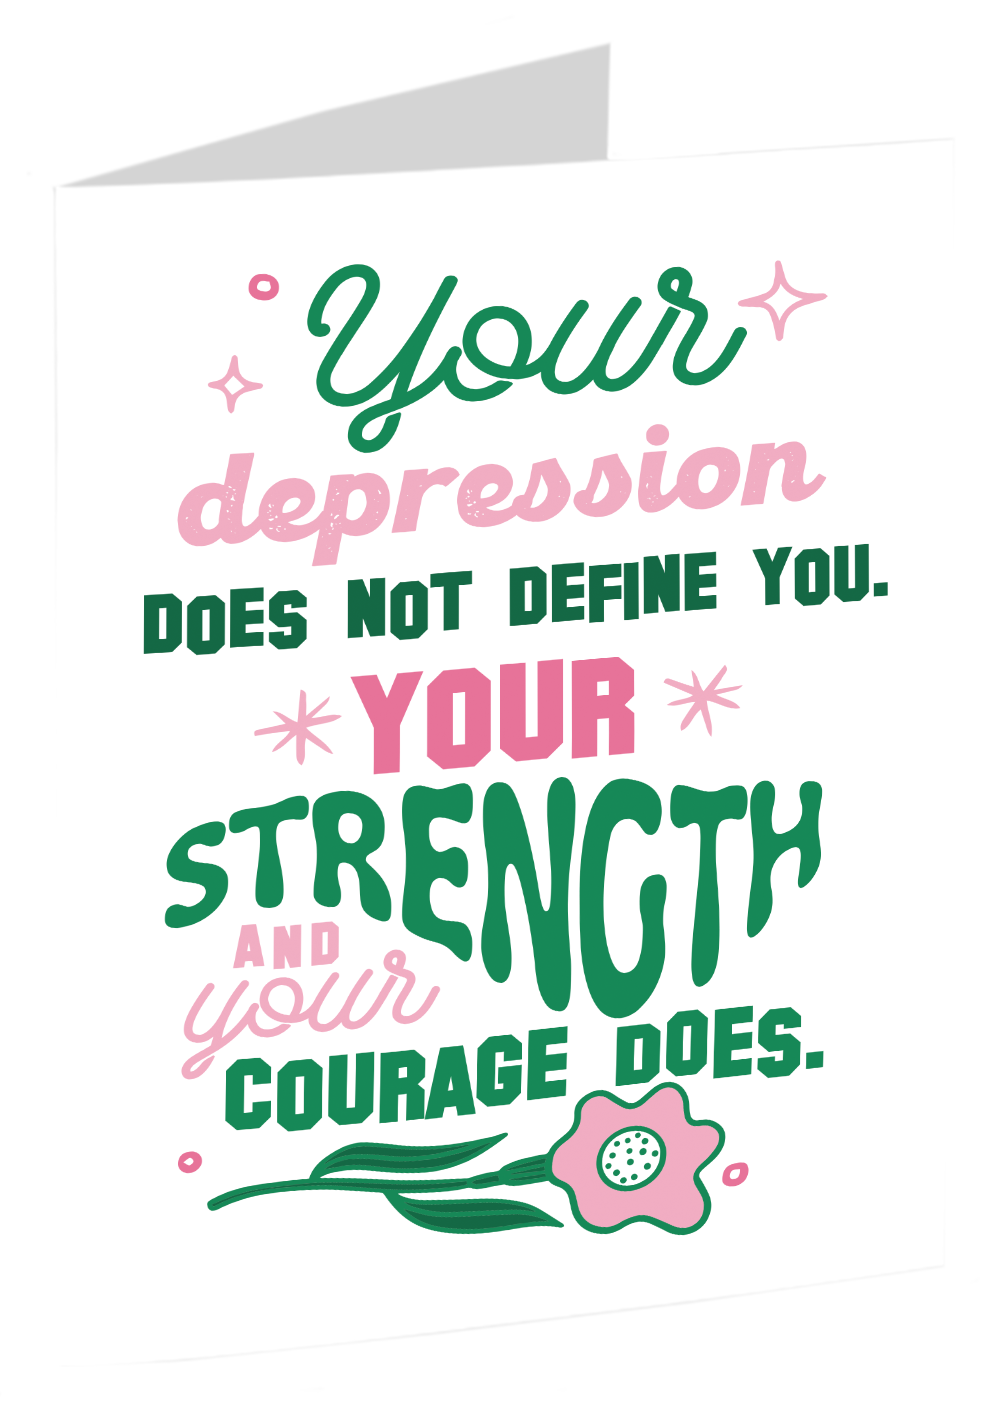 Depression quotes: "Your depression does not define you - your strength and your courage does"